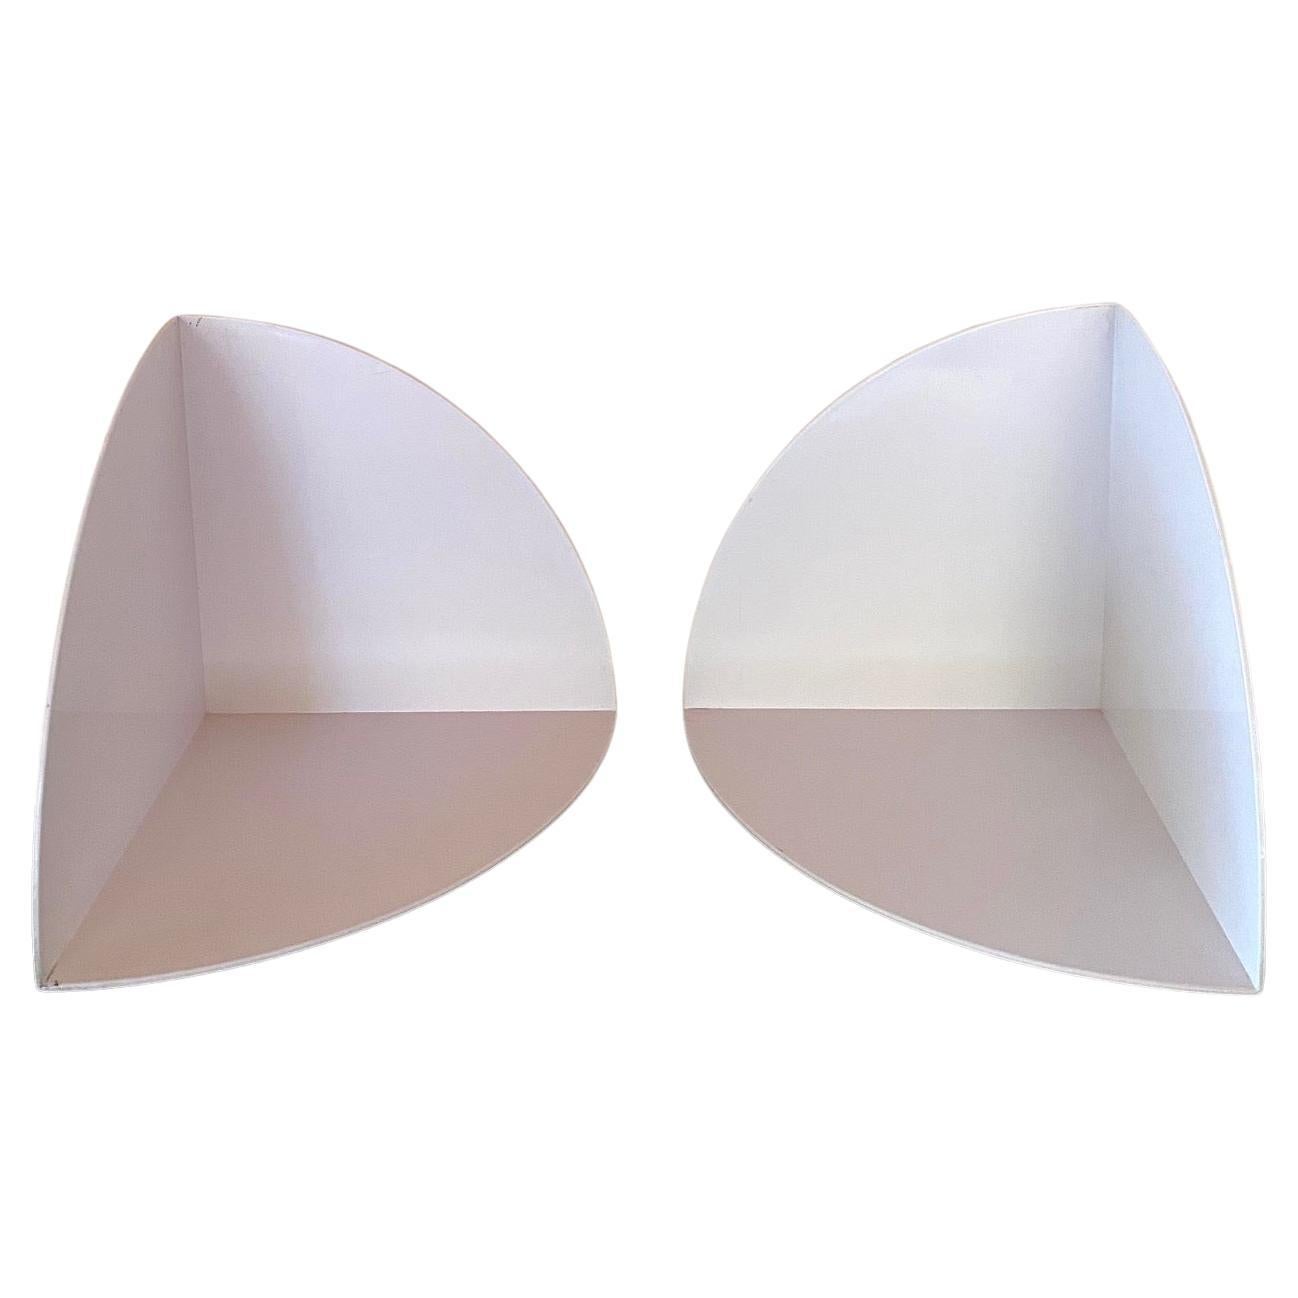 White 4909 Bookends by Giotto Stoppino for Kartell, 1970s, Set of 2 For Sale